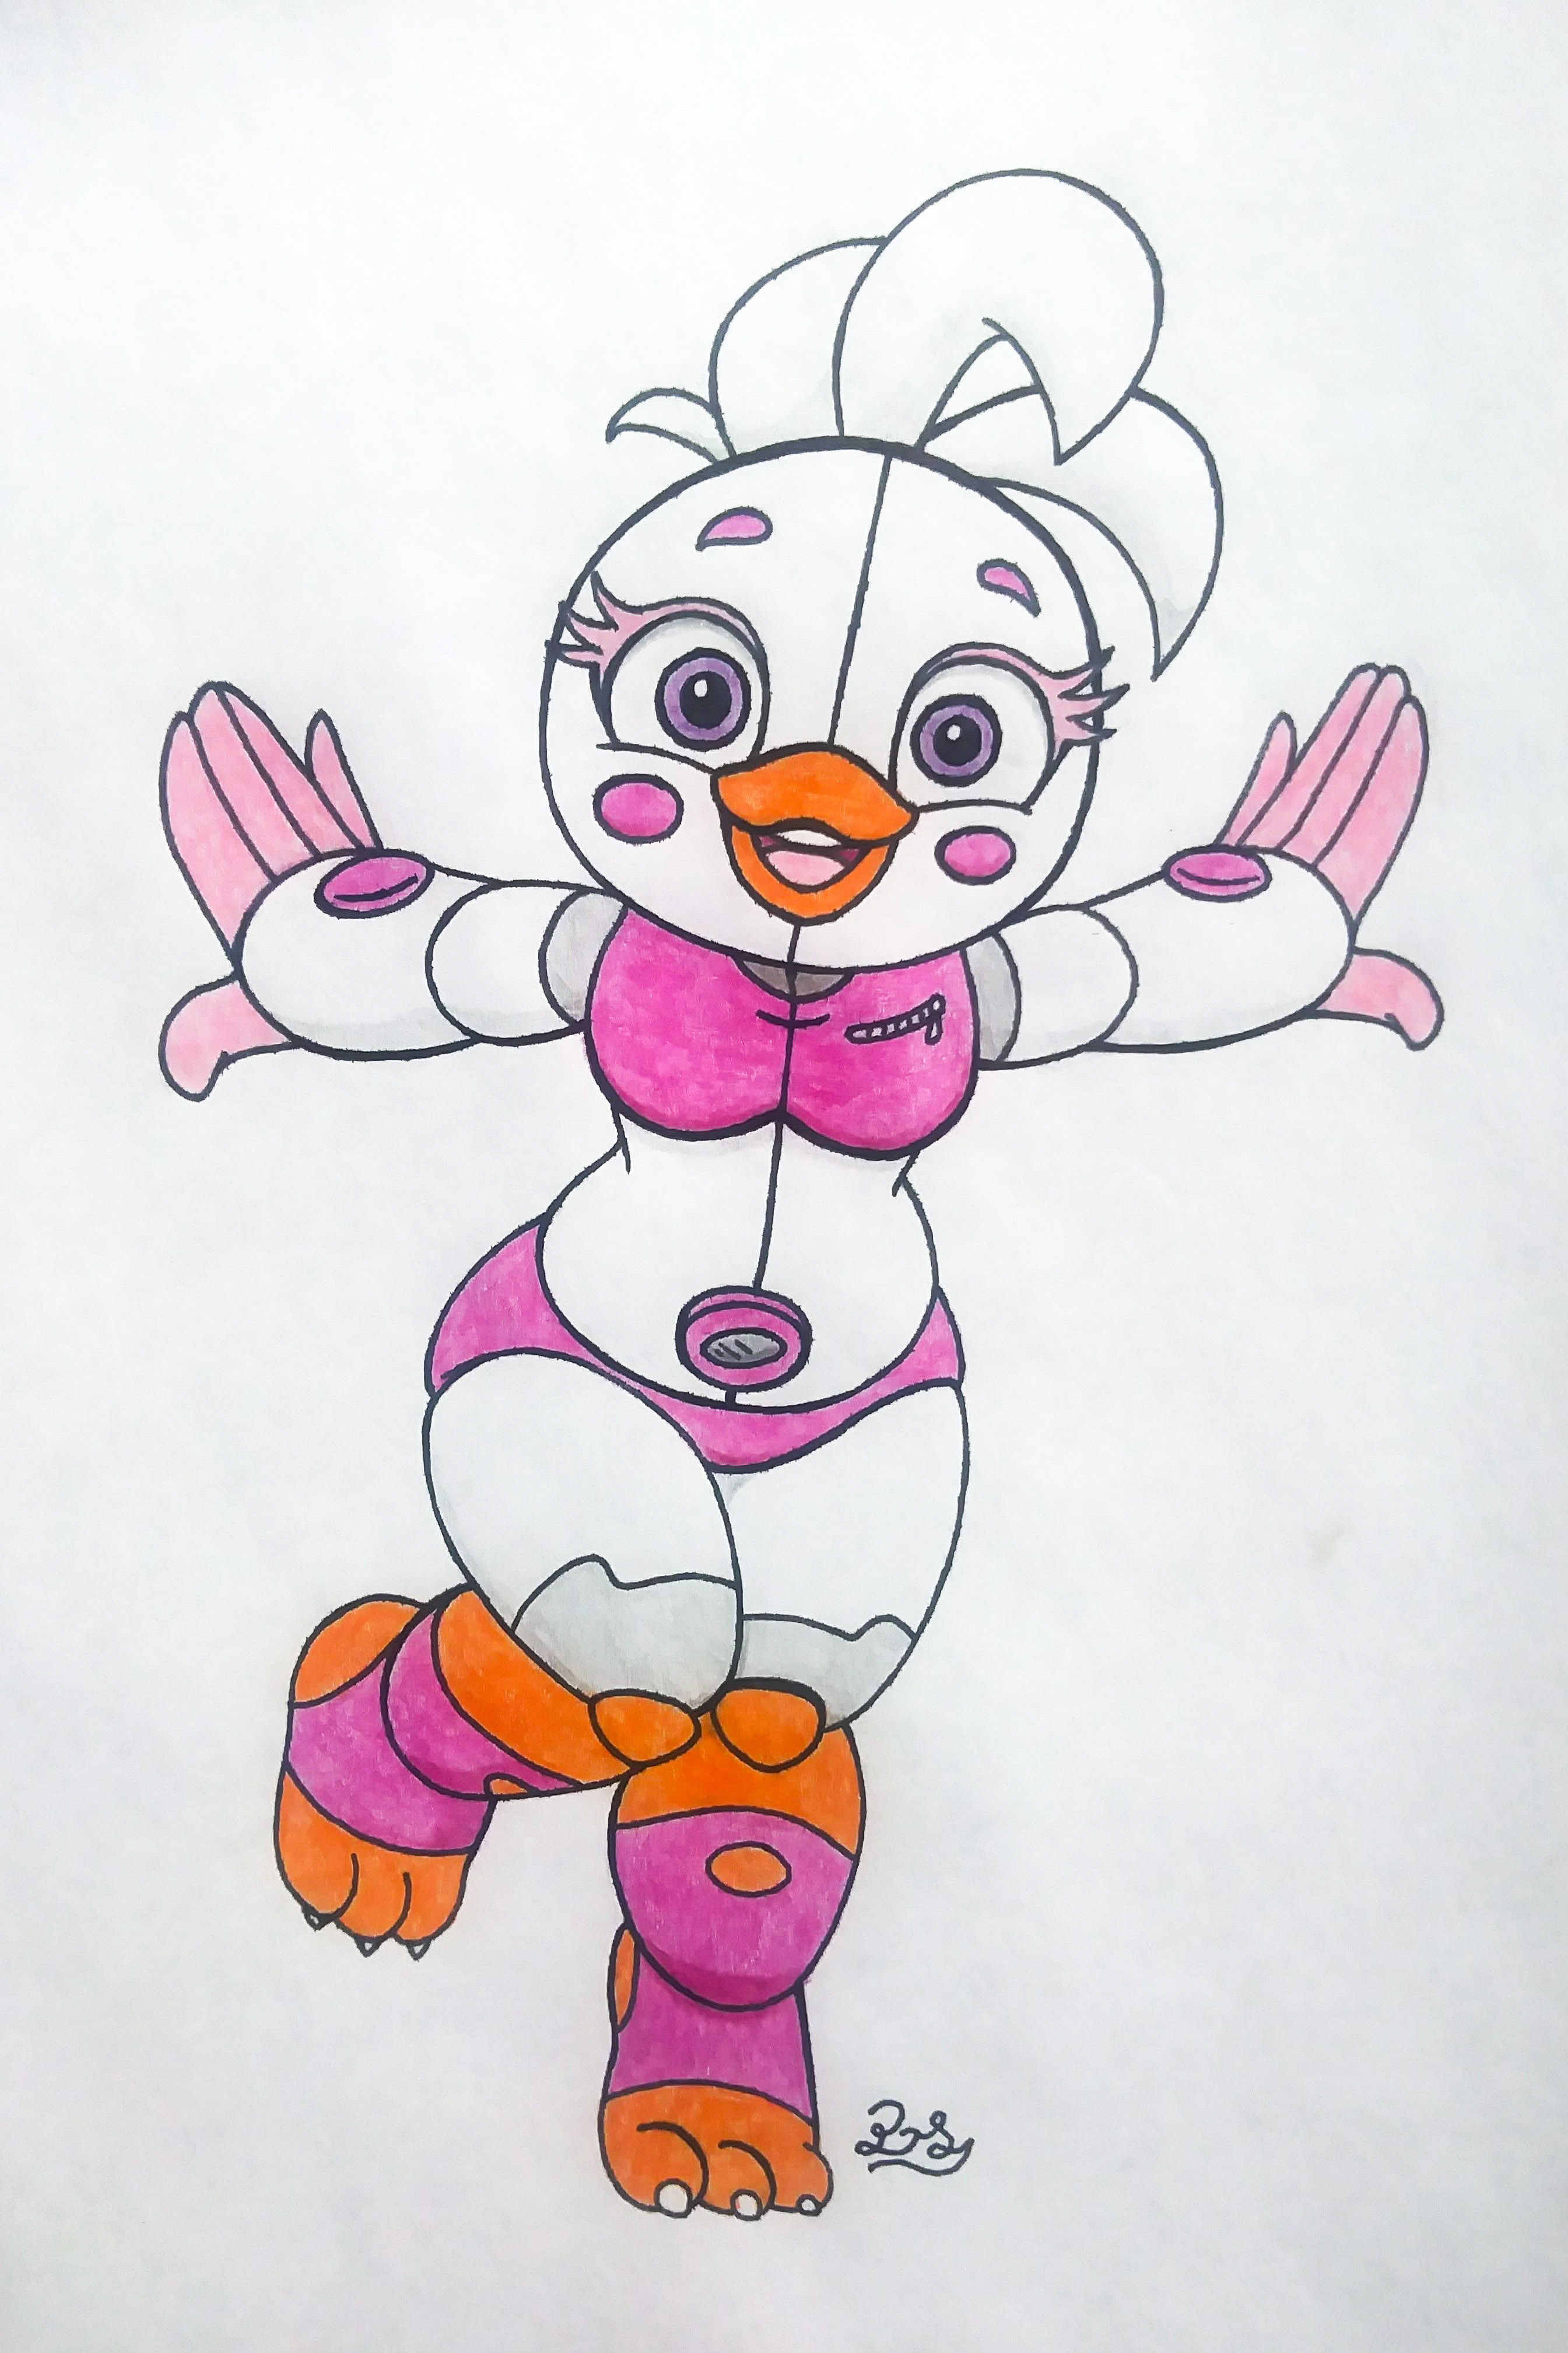 Funtime Chica by PilloTheStar on DeviantArt